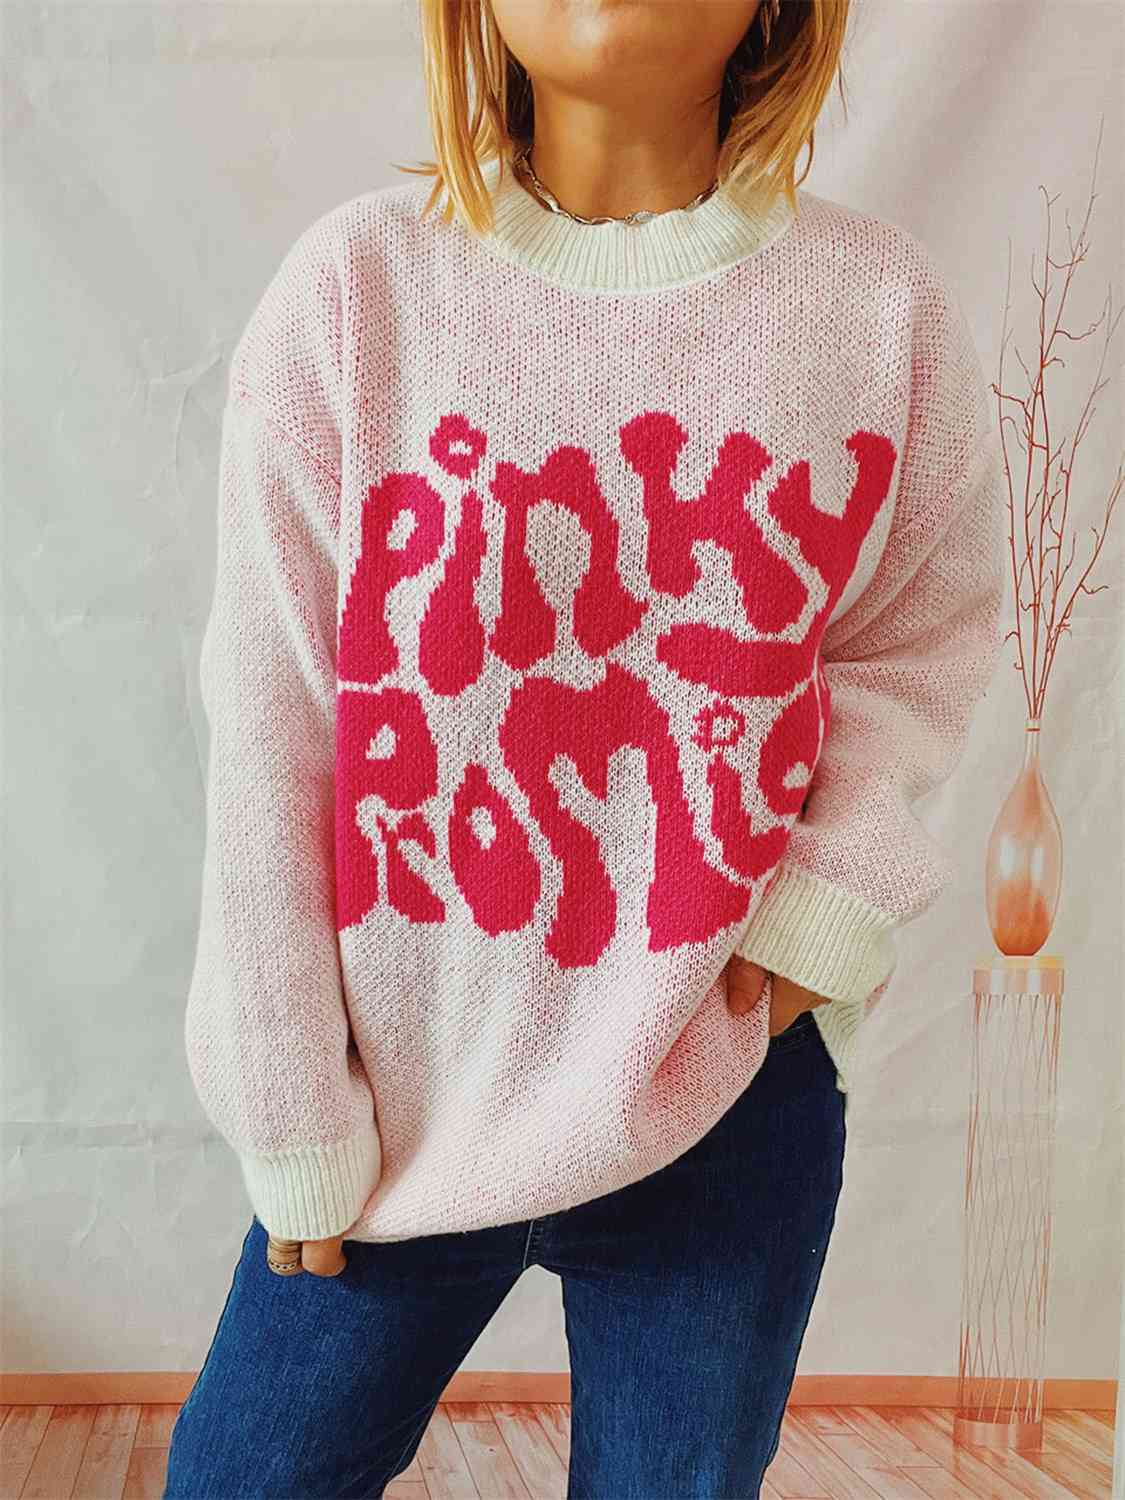 PINKY PROMISE Graphic Sweater - Blush Pink / S - Sweaters - Shirts & Tops - 7 - 2024